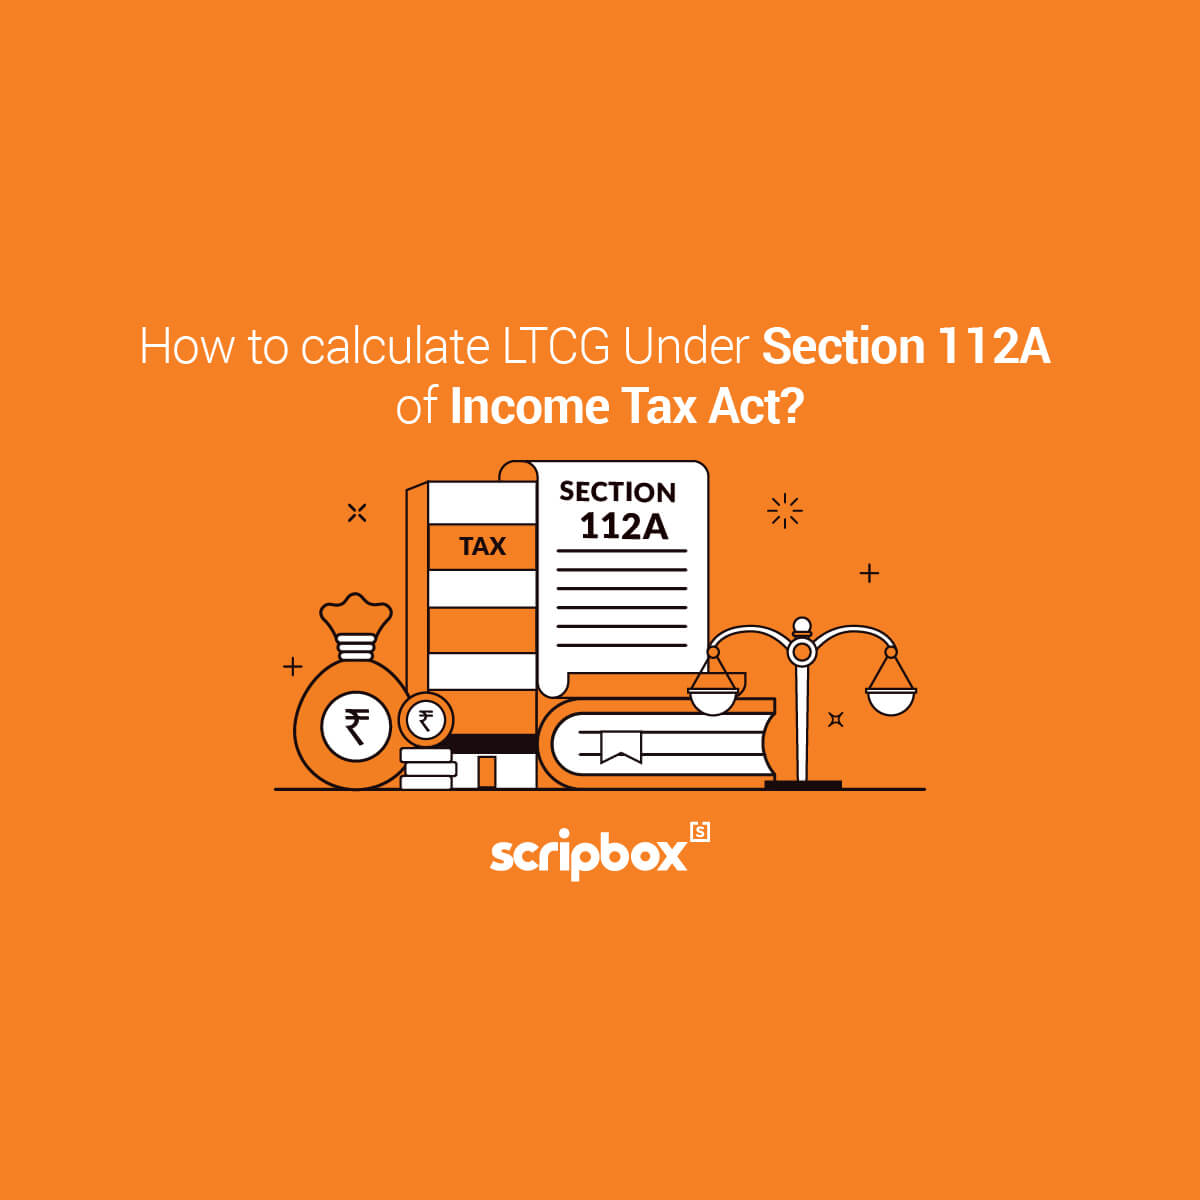 What is the scope and applicability of Section 112A?
